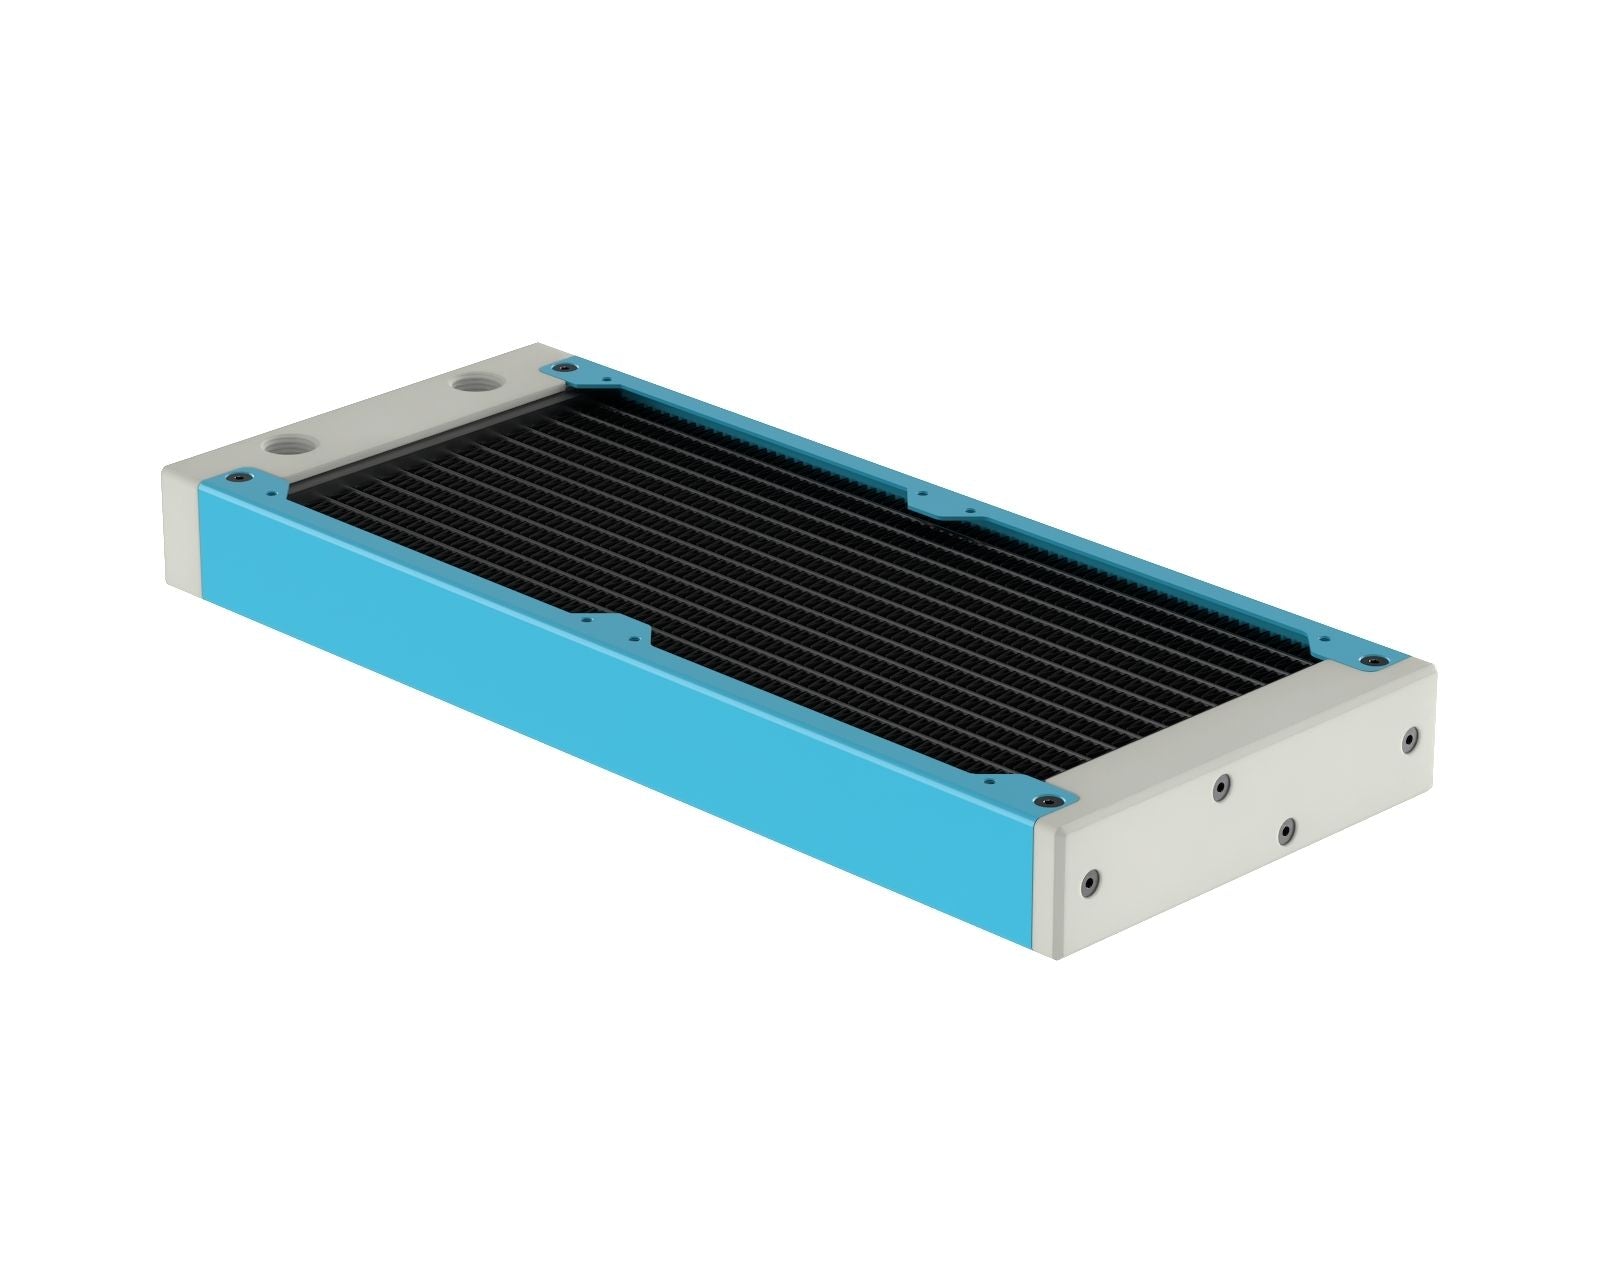 PrimoChill 240SL (30mm) EXIMO Modular Radiator, White POM, 2x120mm, Dual Fan (R-SL-W24) Available in 20+ Colors, Assembled in USA and Custom Watercooling Loop Ready - Sky Blue